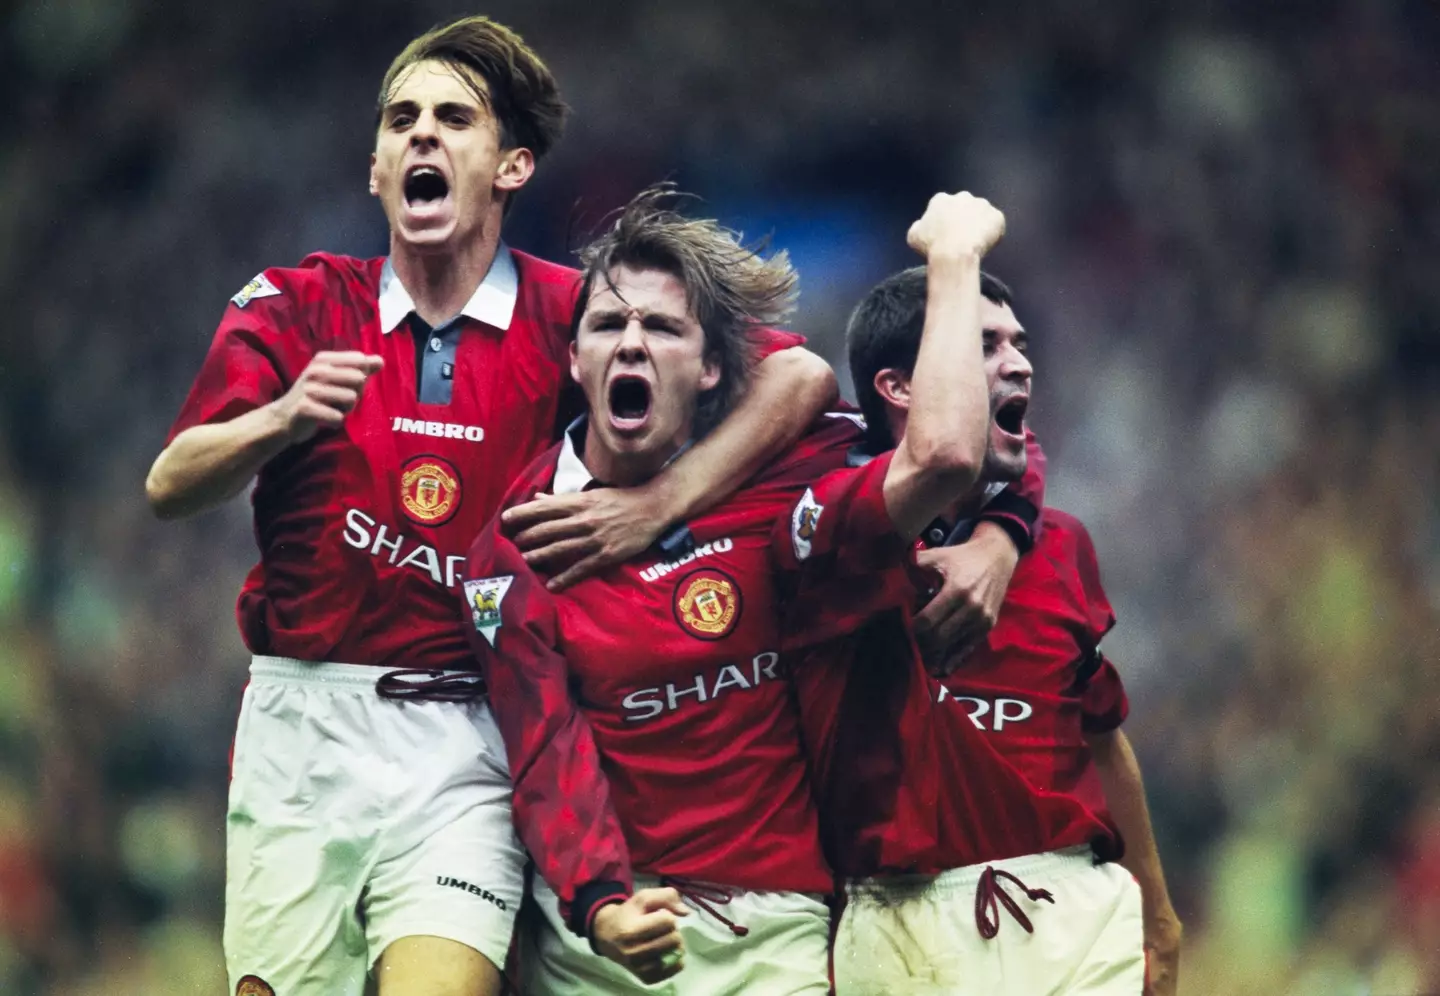 Gary Neville made over 100 Champions League appearances (Getty)